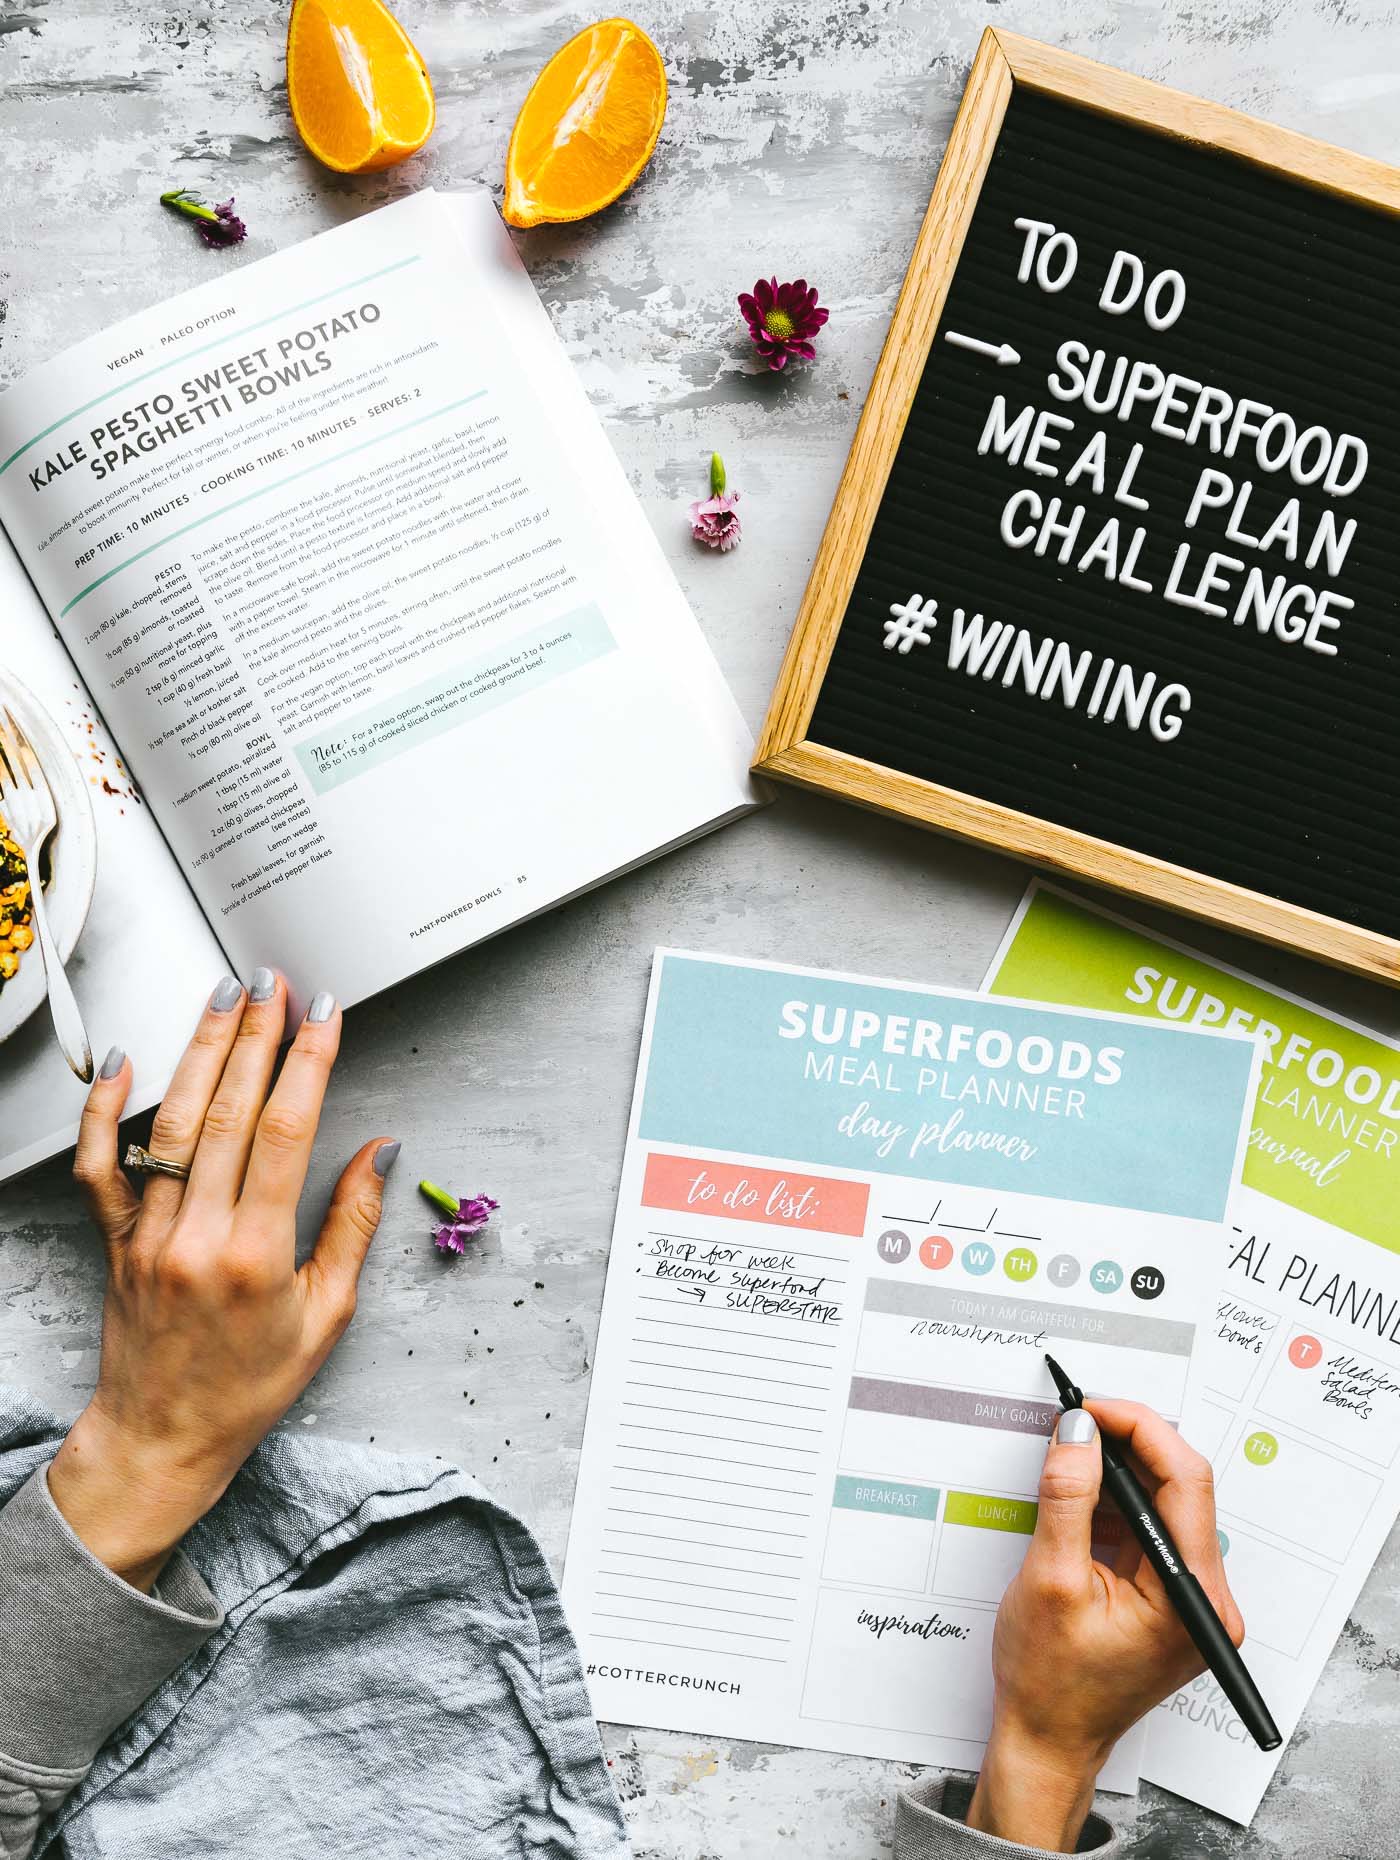 Alright you Superfoods Superstars, you. We've had some questions on how our Gluten Free Superfoods Meal Plan and Challenge works! Well, you asked, we listened. Buckle up for a quick SUPERfood ride.